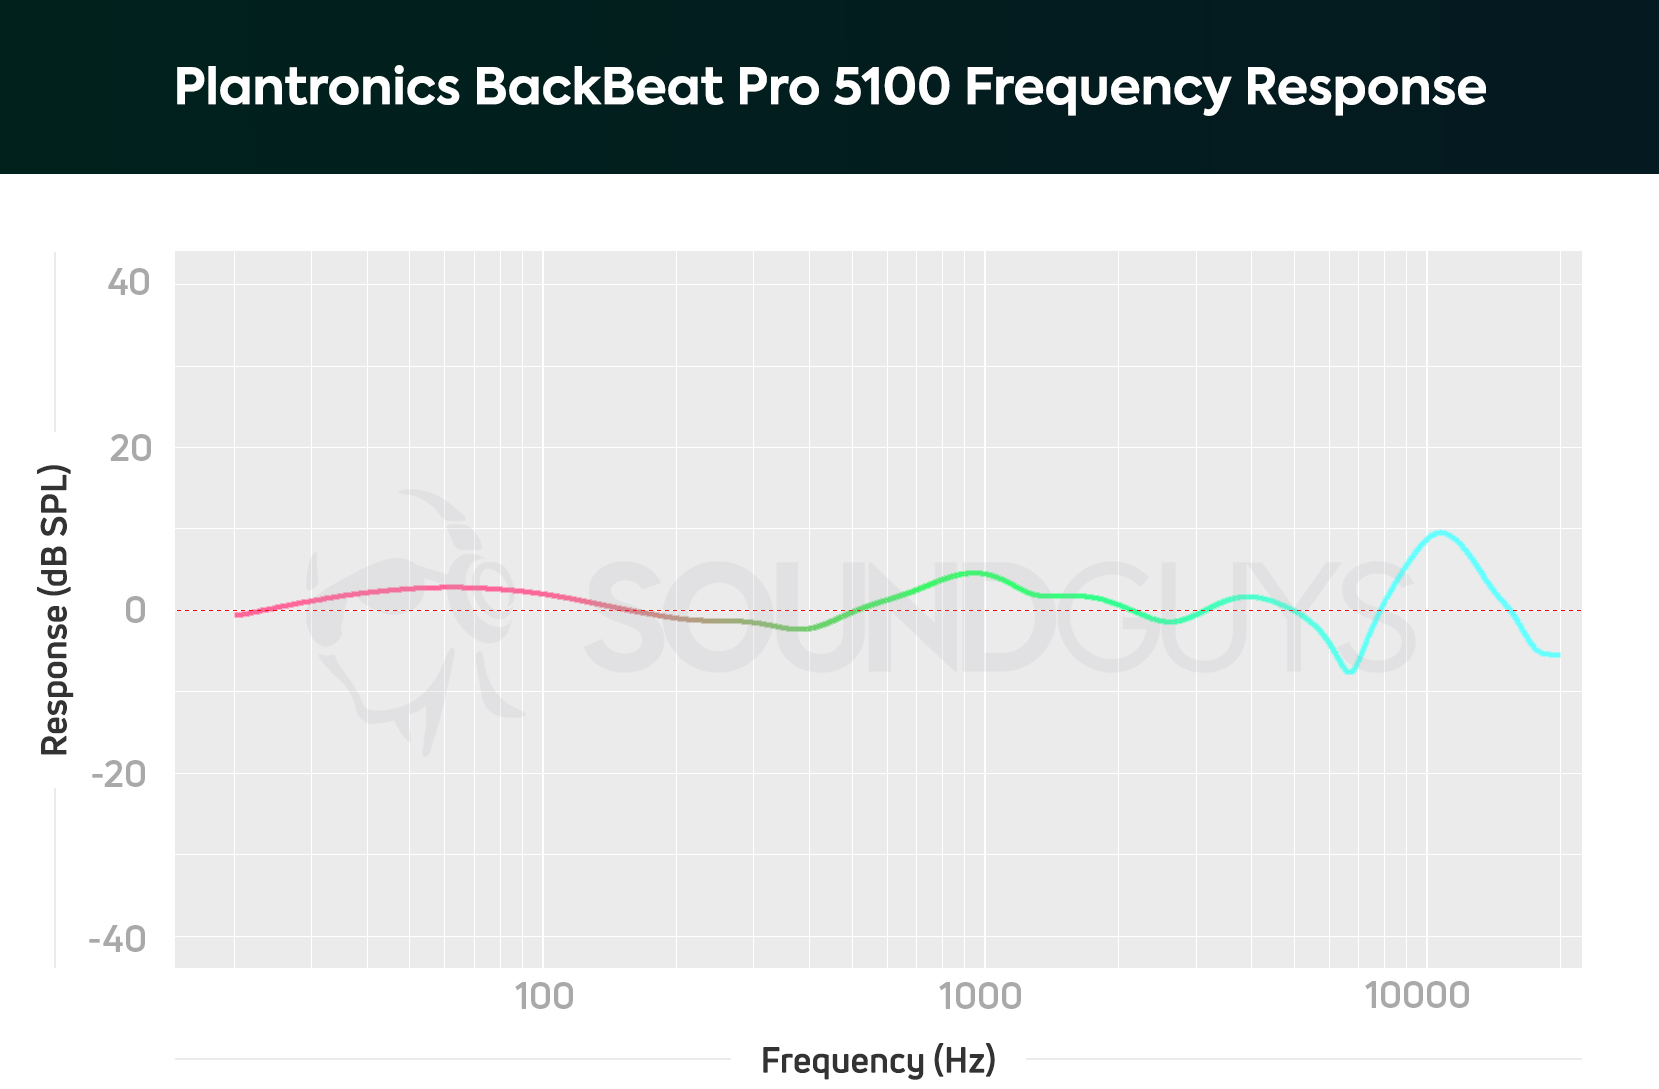 A chart depicting the Plantronics BackBeat Pro 5100 true wireless earbuds frequency response.